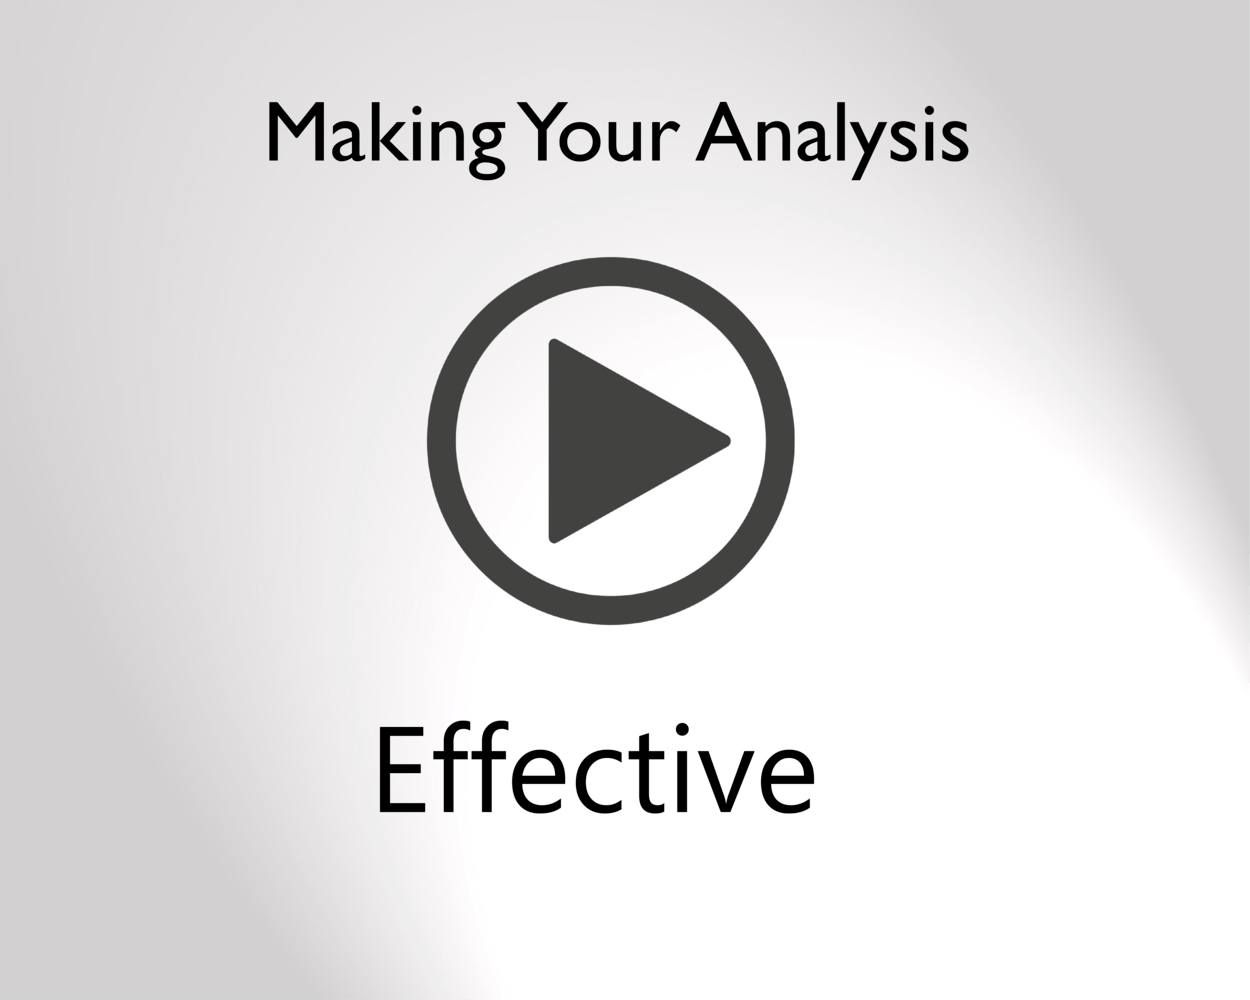 Making Your Analysis Effective